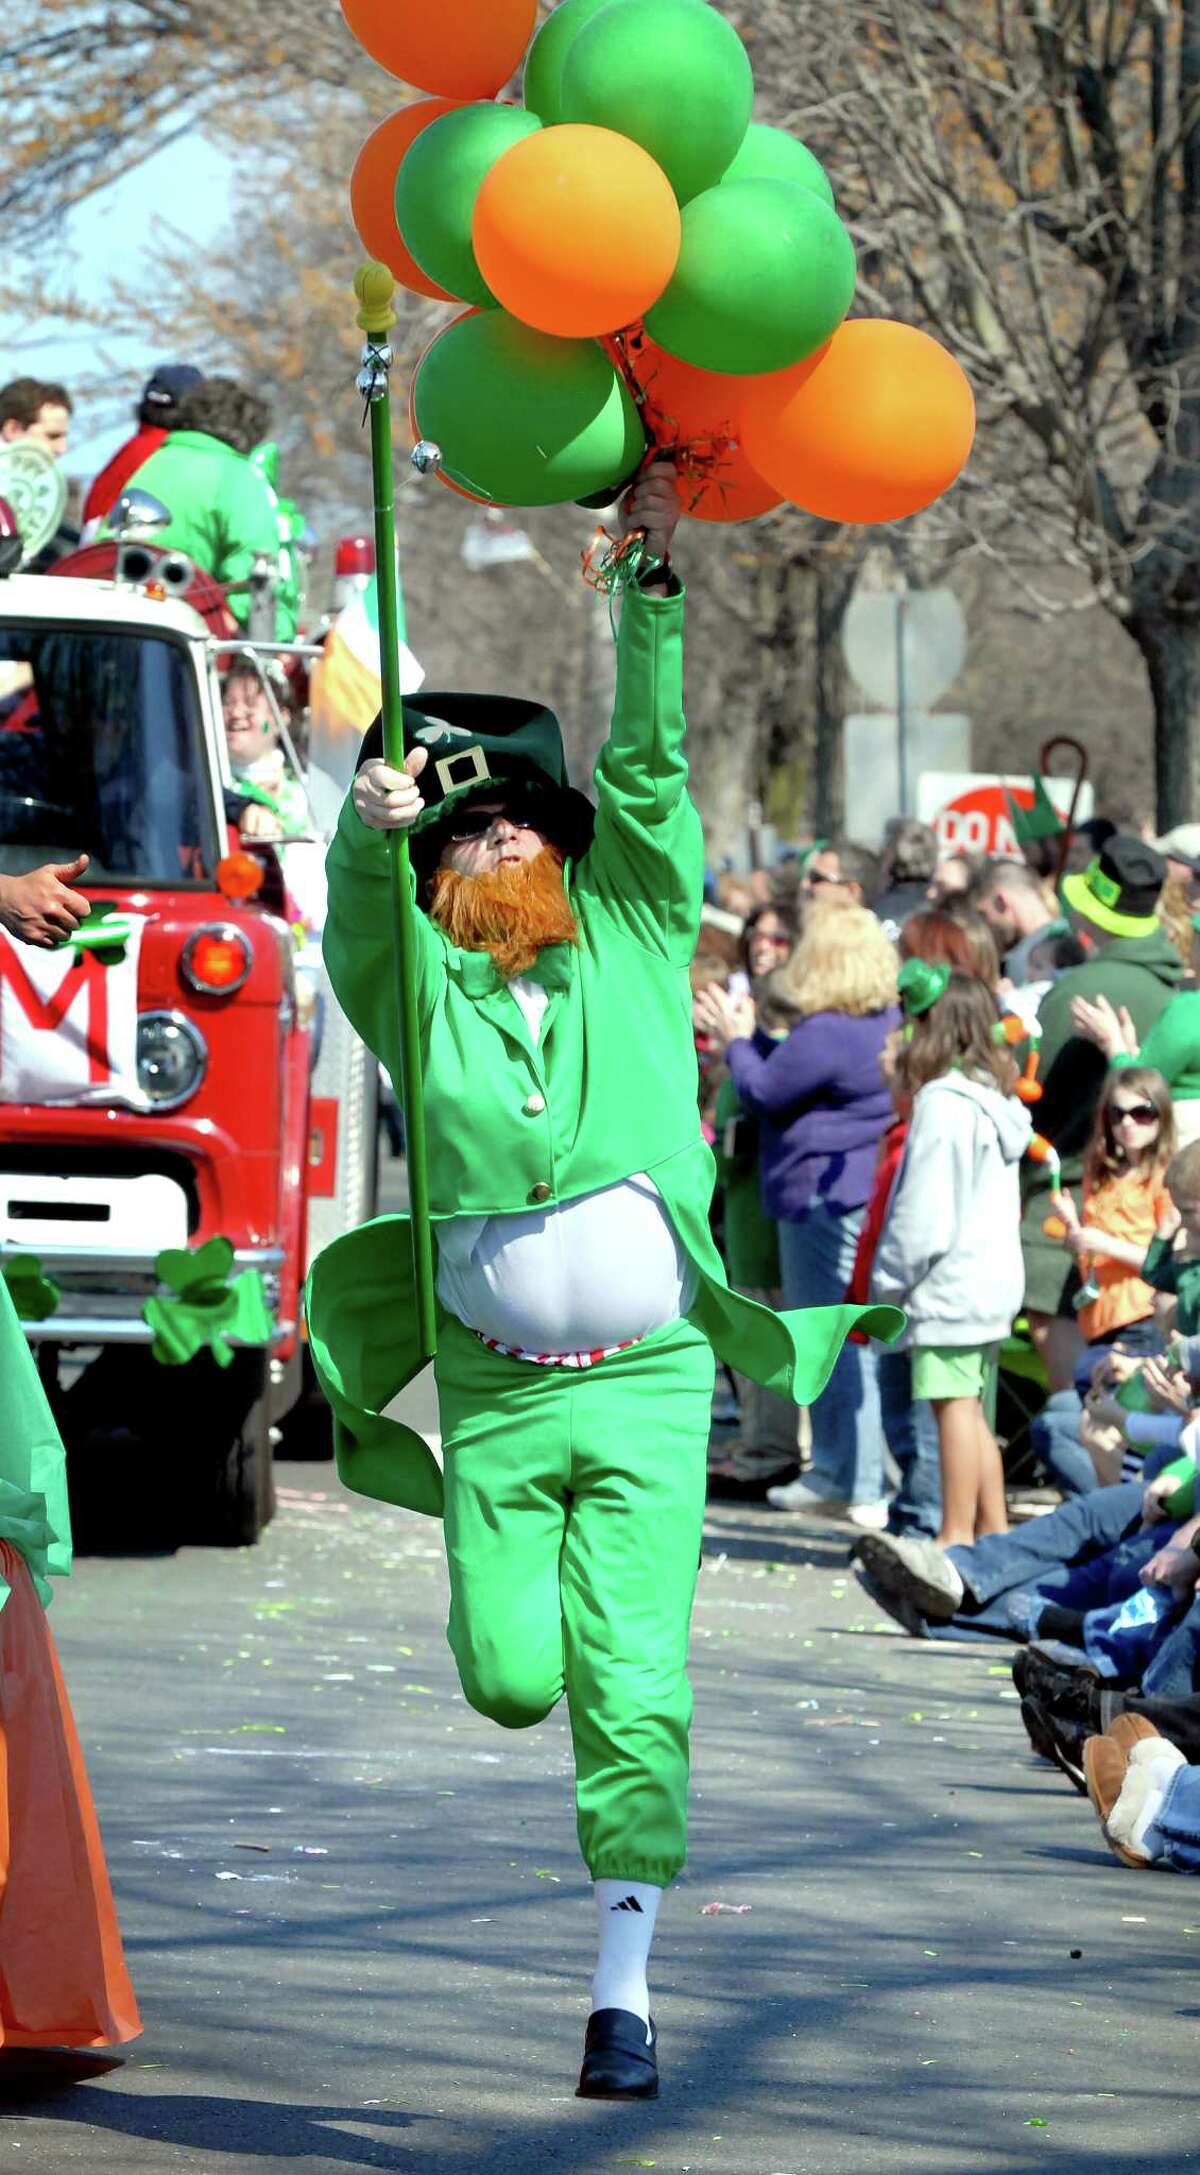 SEEN Milford St. Patrick's Day parade through the years